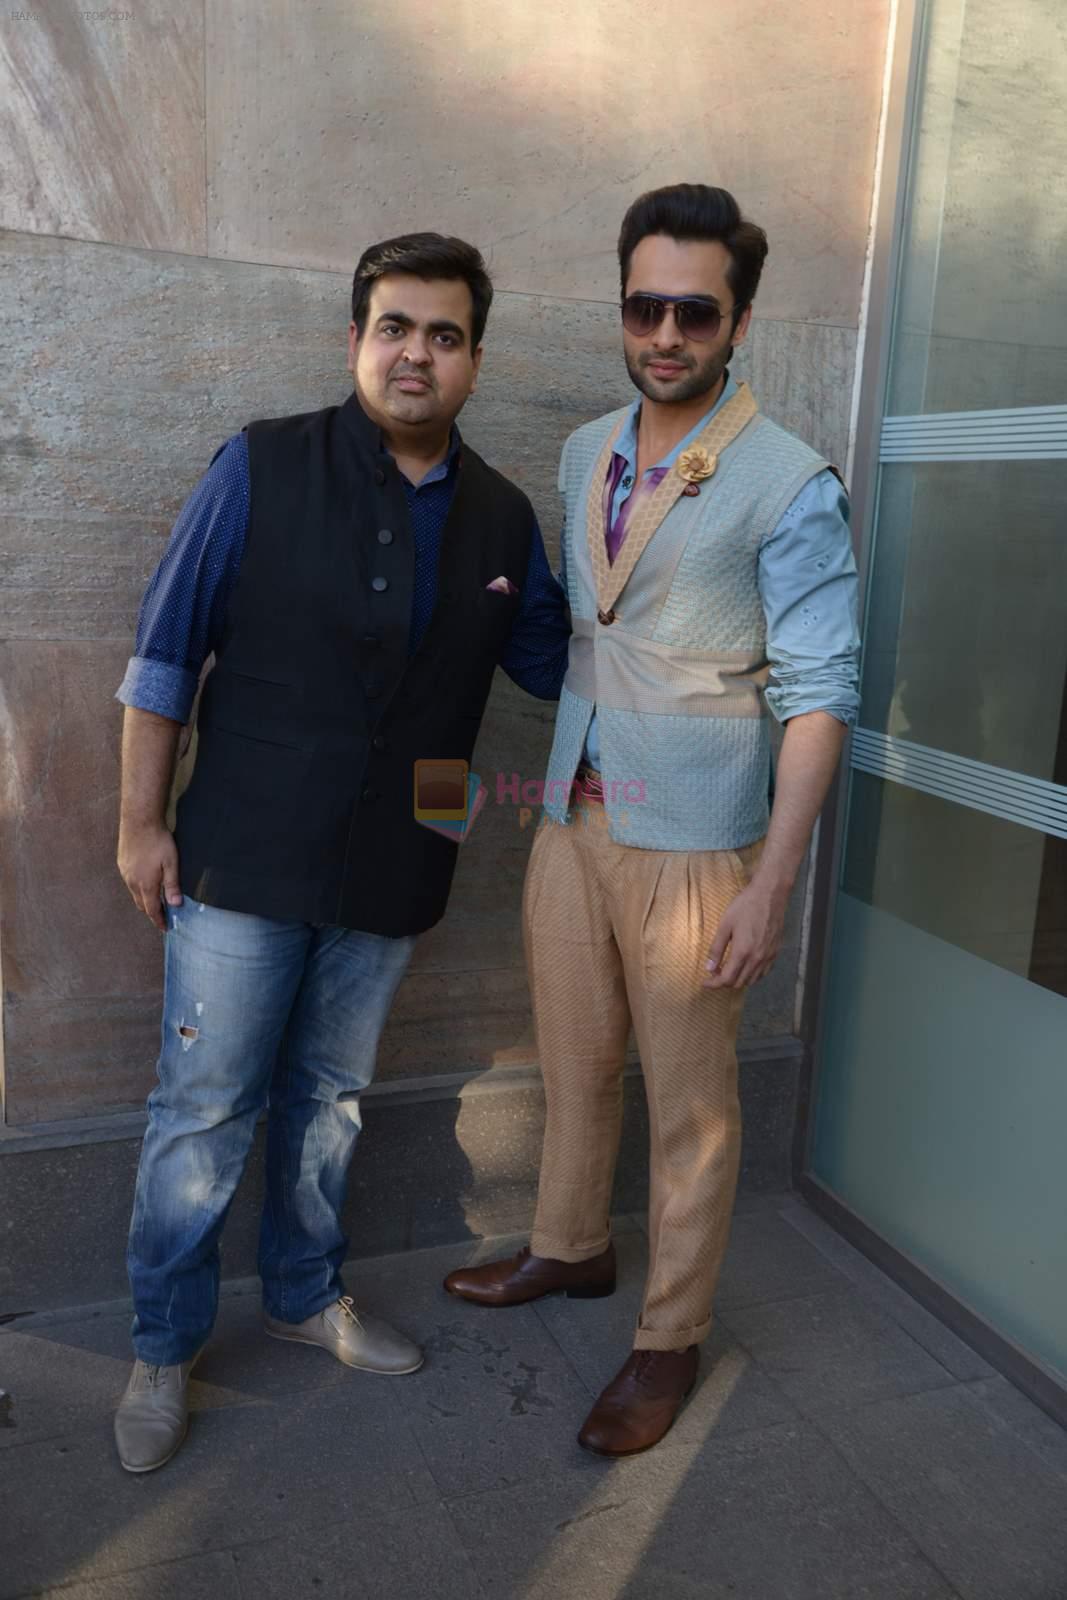 Jackky Bhagnani at Lakme Fashion Week preview in Palladium on 3rd March 2015